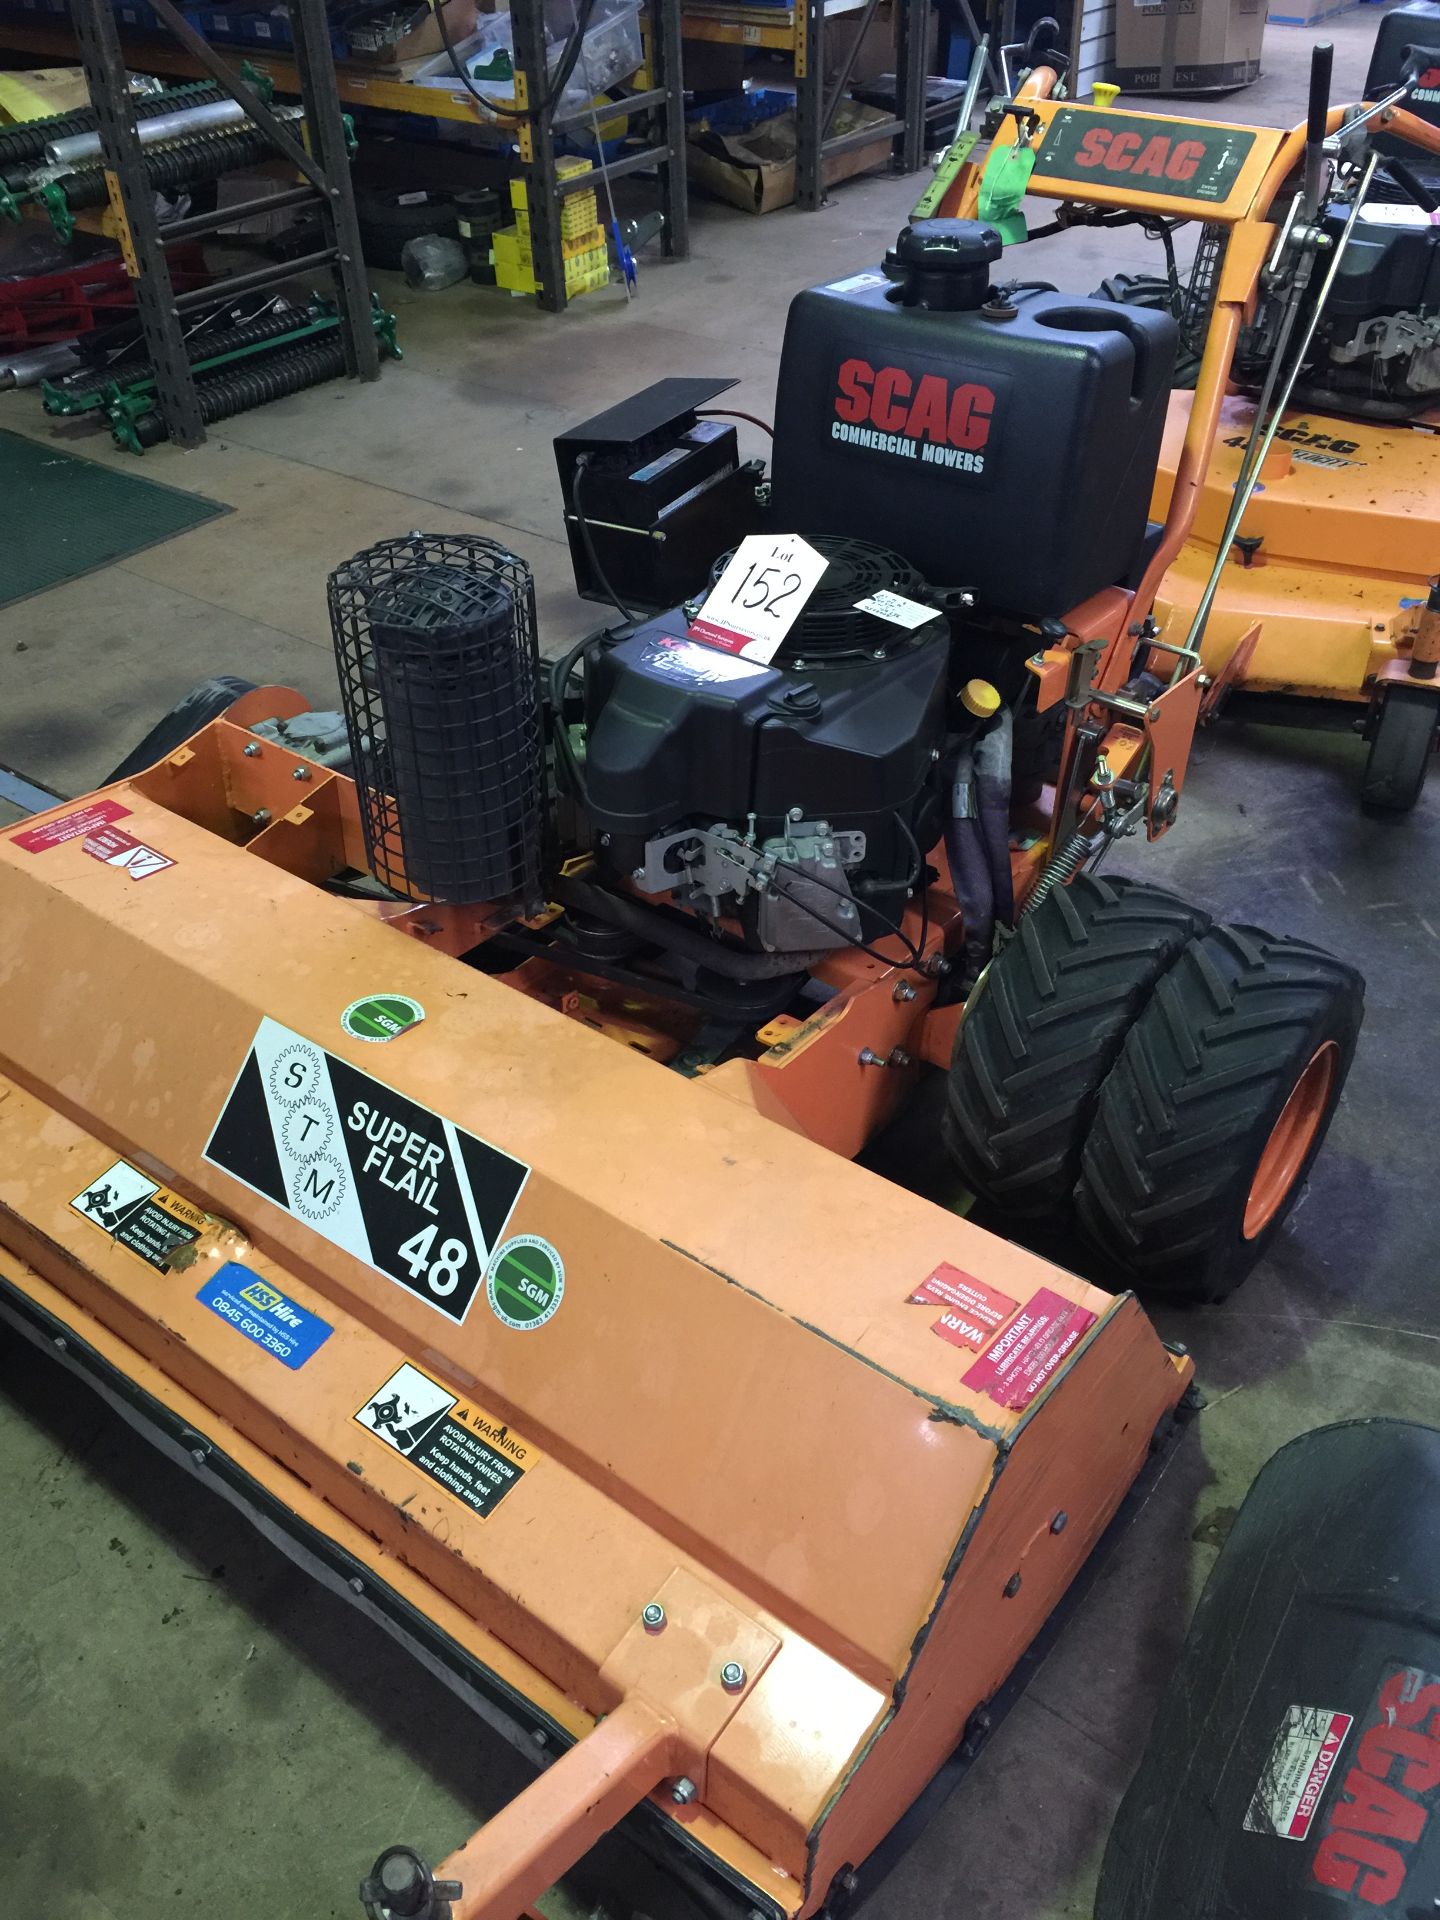 Scag Hydro-Drive SWZ48V15FS Walk behind Mower with electric starter and Scag 48 velocity cutter